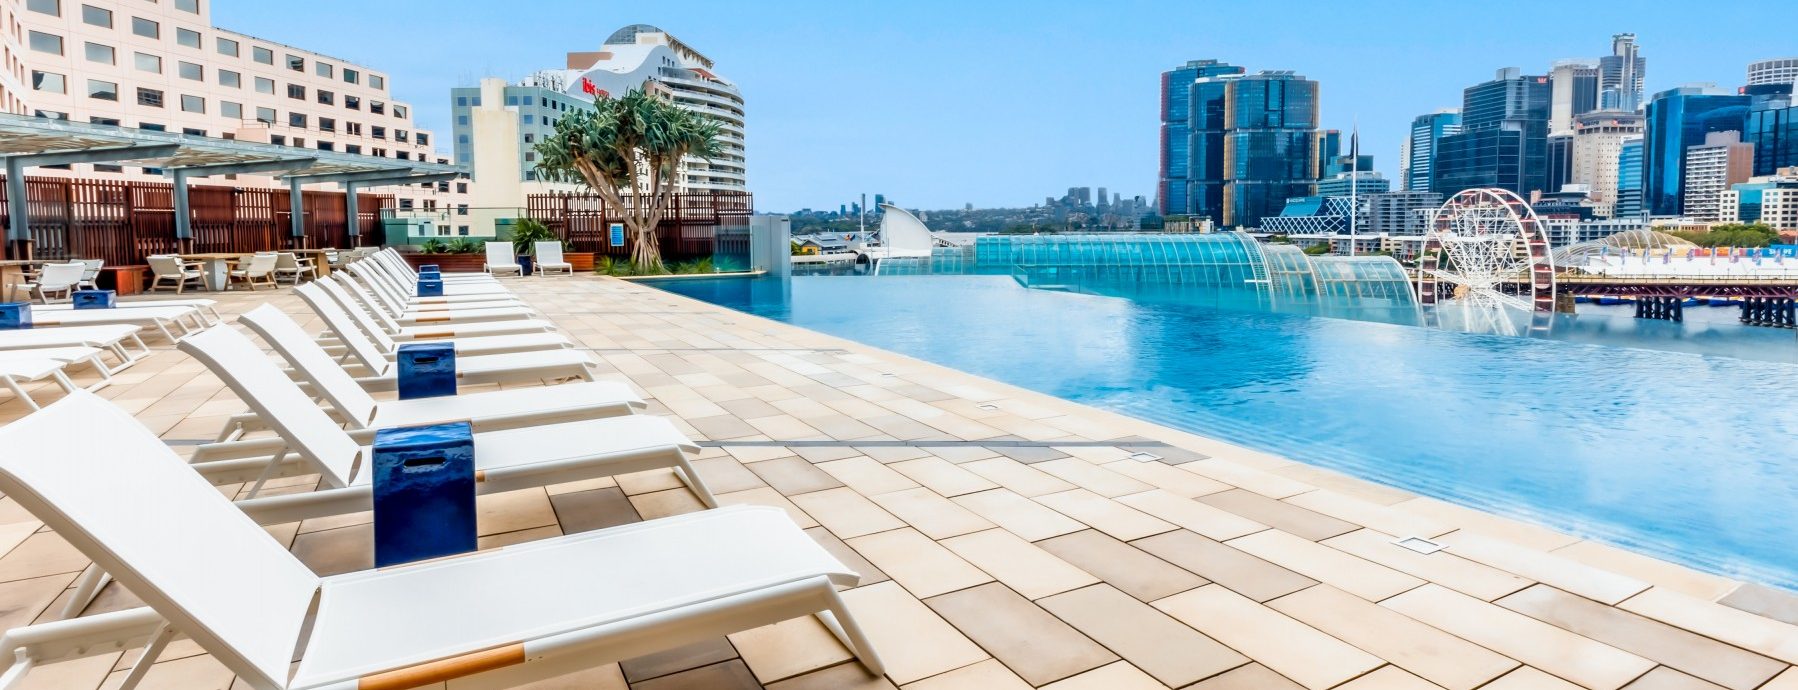 sofitel-sydney-darling-harbour-hotel-le-rivage-infinity-pool